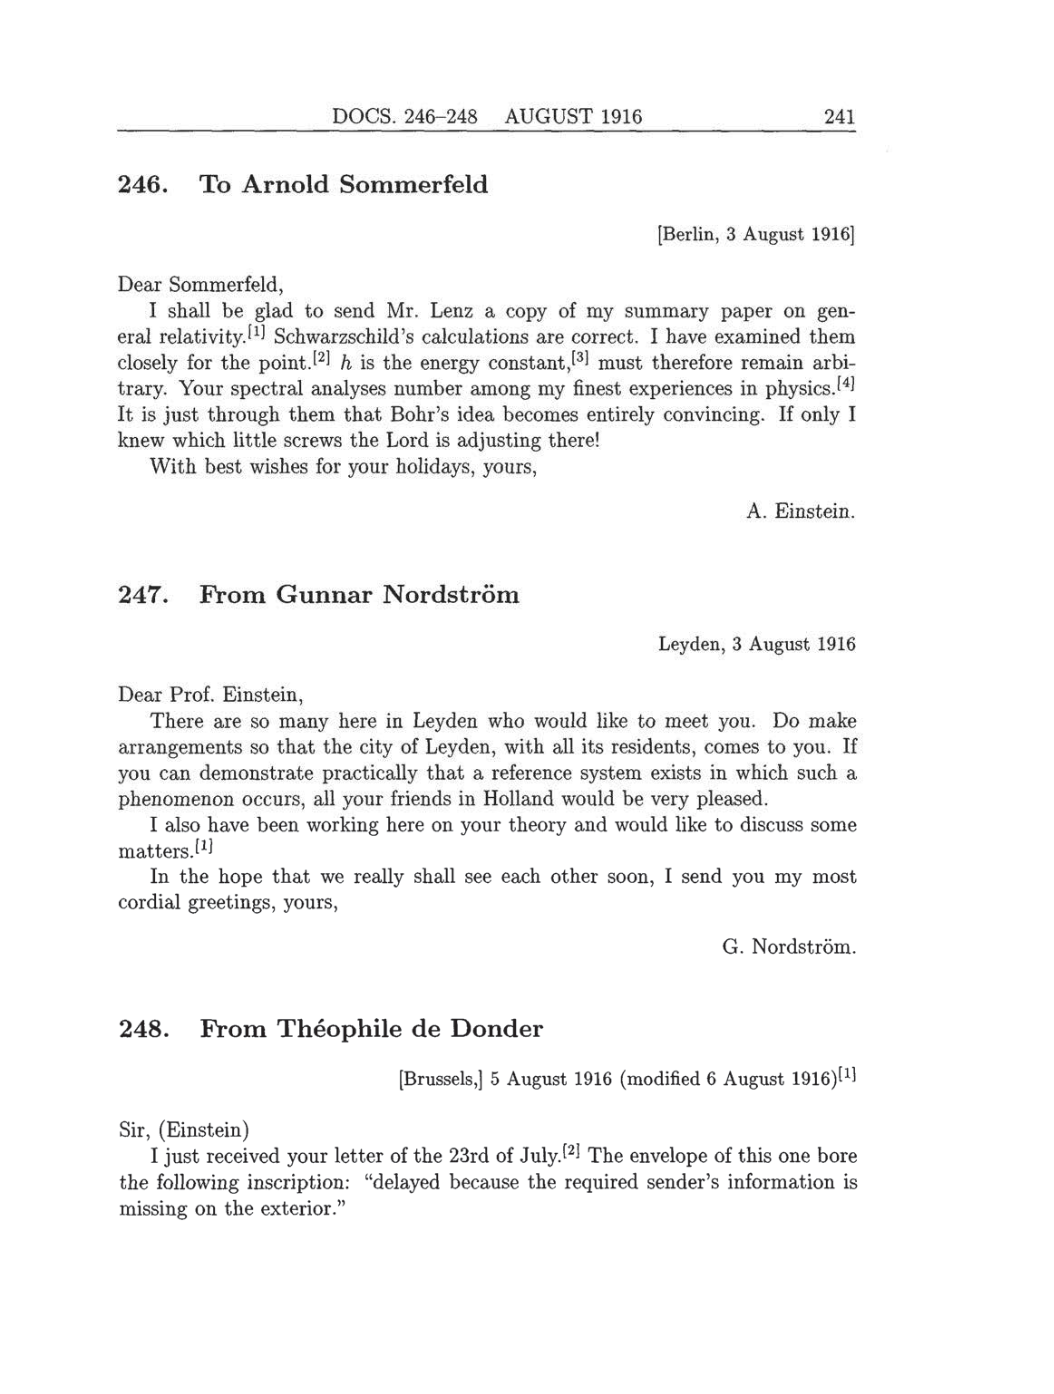 Volume 8: The Berlin Years: Correspondence, 1914-1918 (English translation supplement) page 241